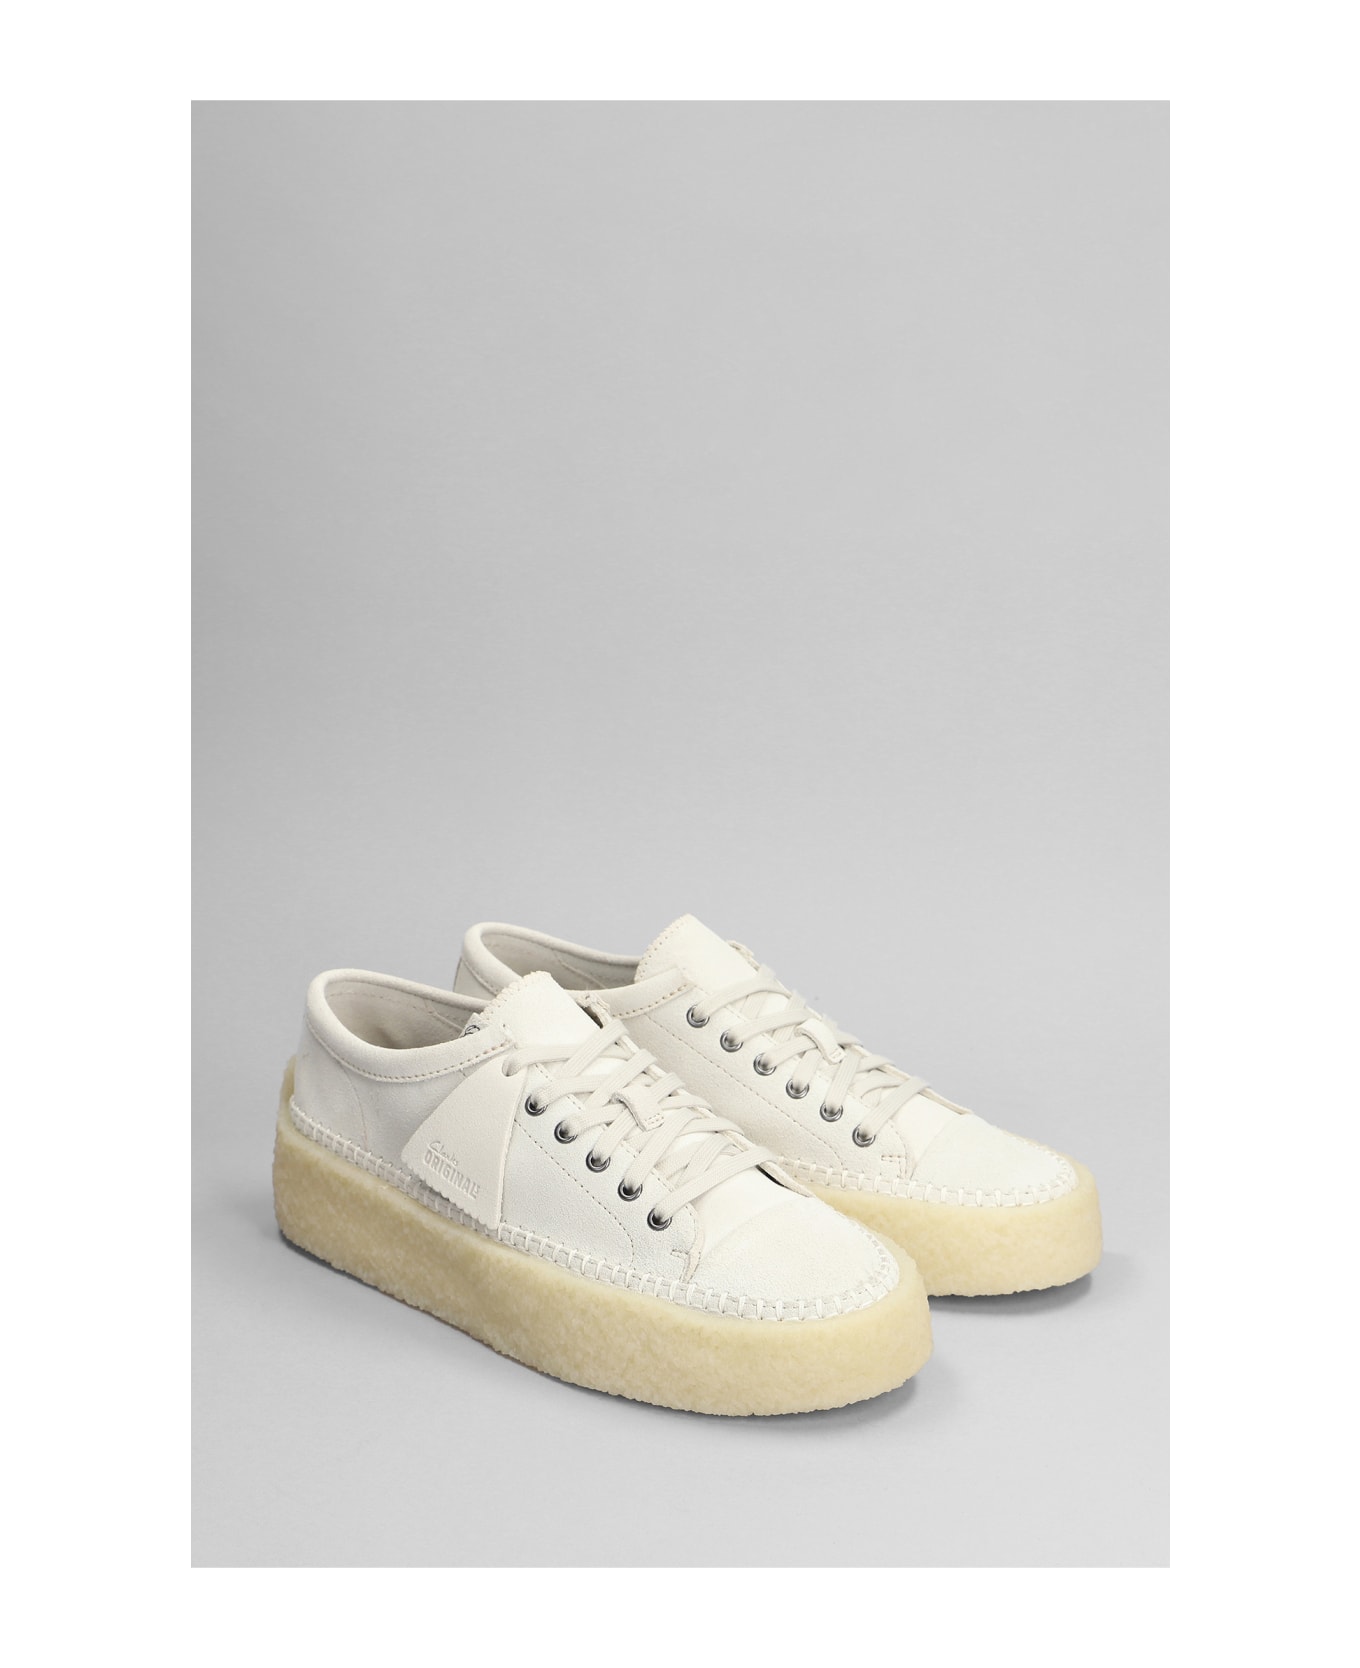 Clarks Caravan Low Lace Up Shoes In White Suede - white レースアップシューズ